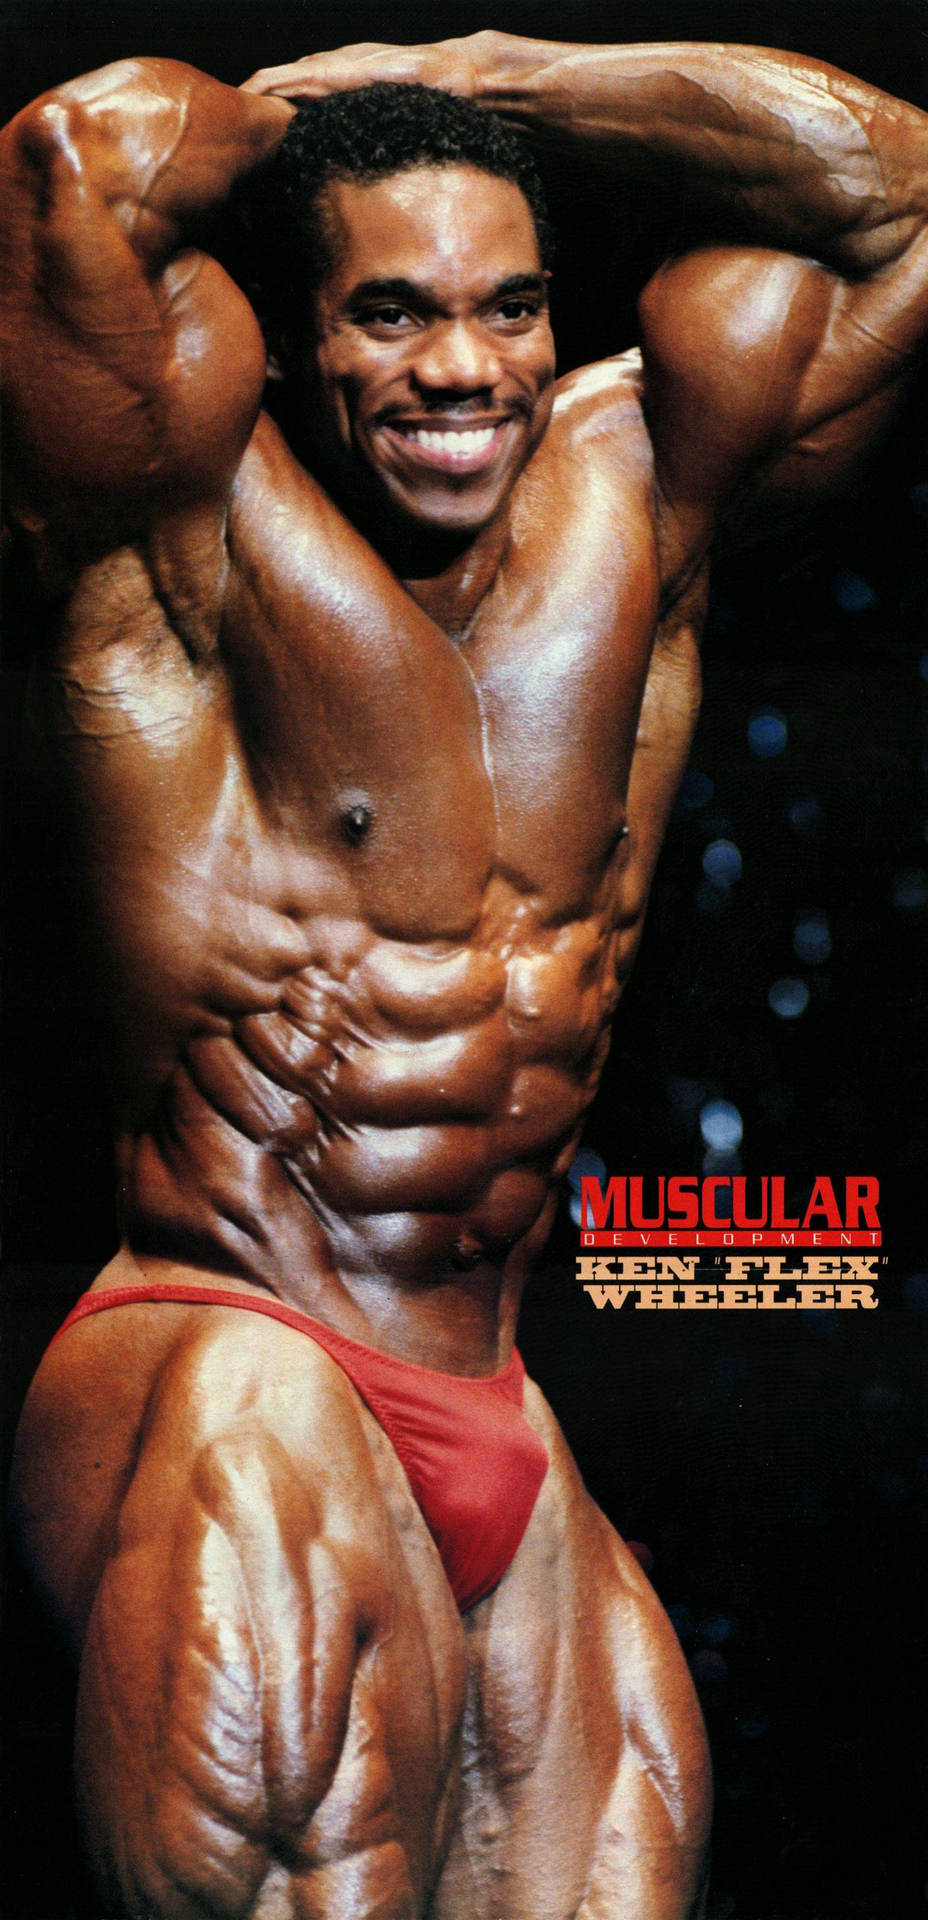 I Gotta Be Honest Regardless Who I Upset” : Flex Wheeler Subtly Hinted  Unfair Treatment at 1998 Mr. Olympia Where He Lost to Ronnie Coleman -  EssentiallySports